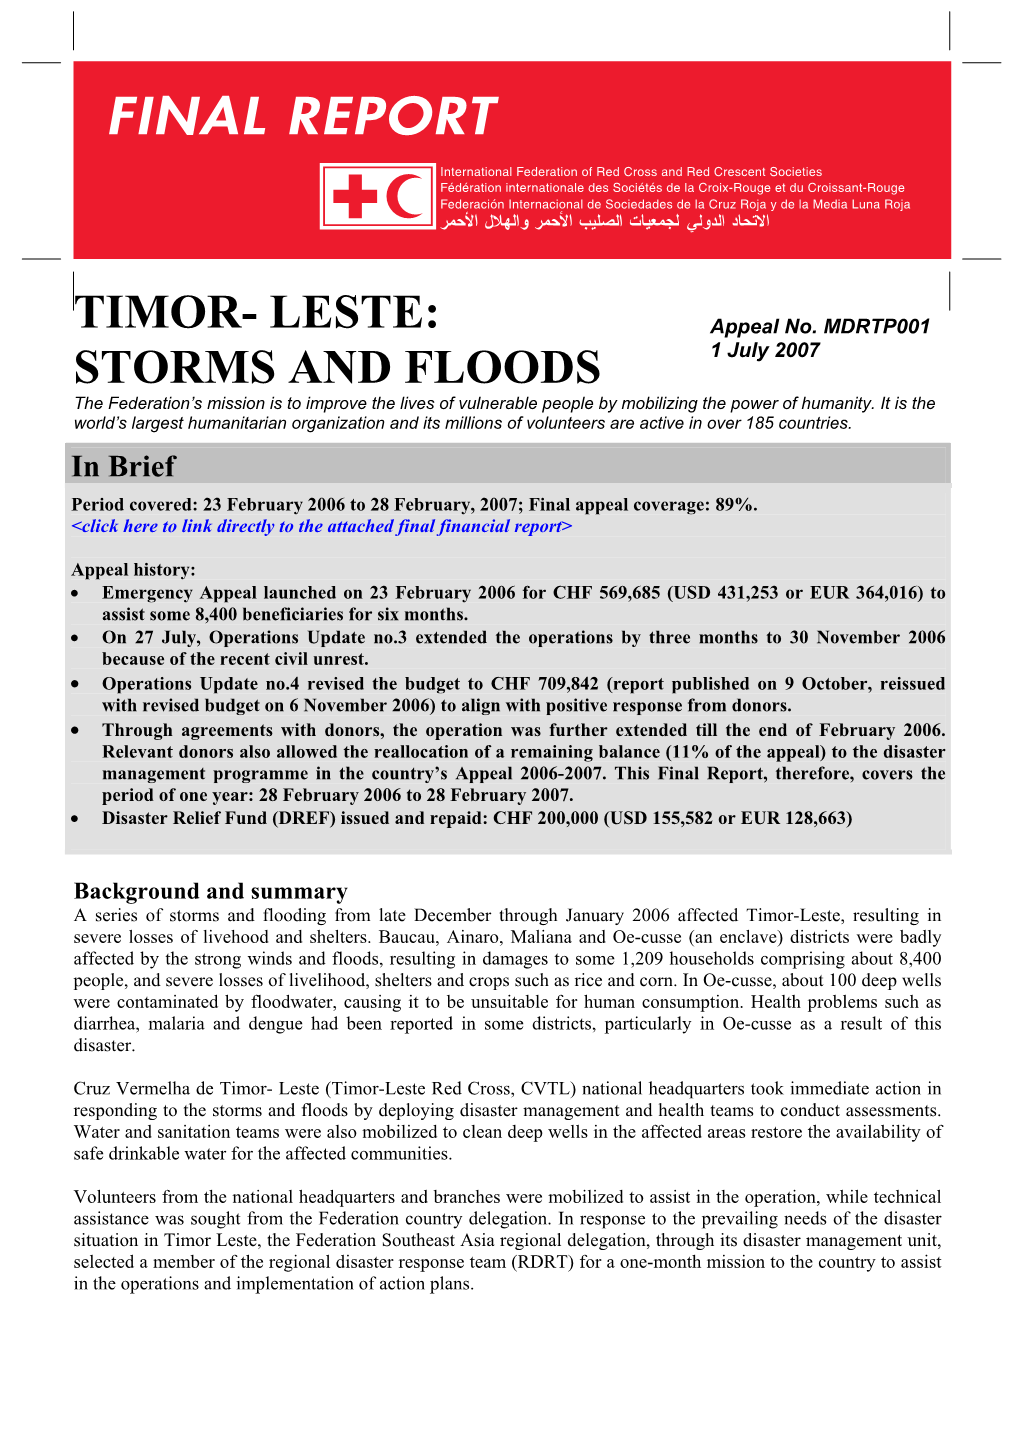 STORMS and FLOODS 1 July 2007 the Federation’S Mission Is to Improve the Lives of Vulnerable People by Mobilizing the Power of Humanity